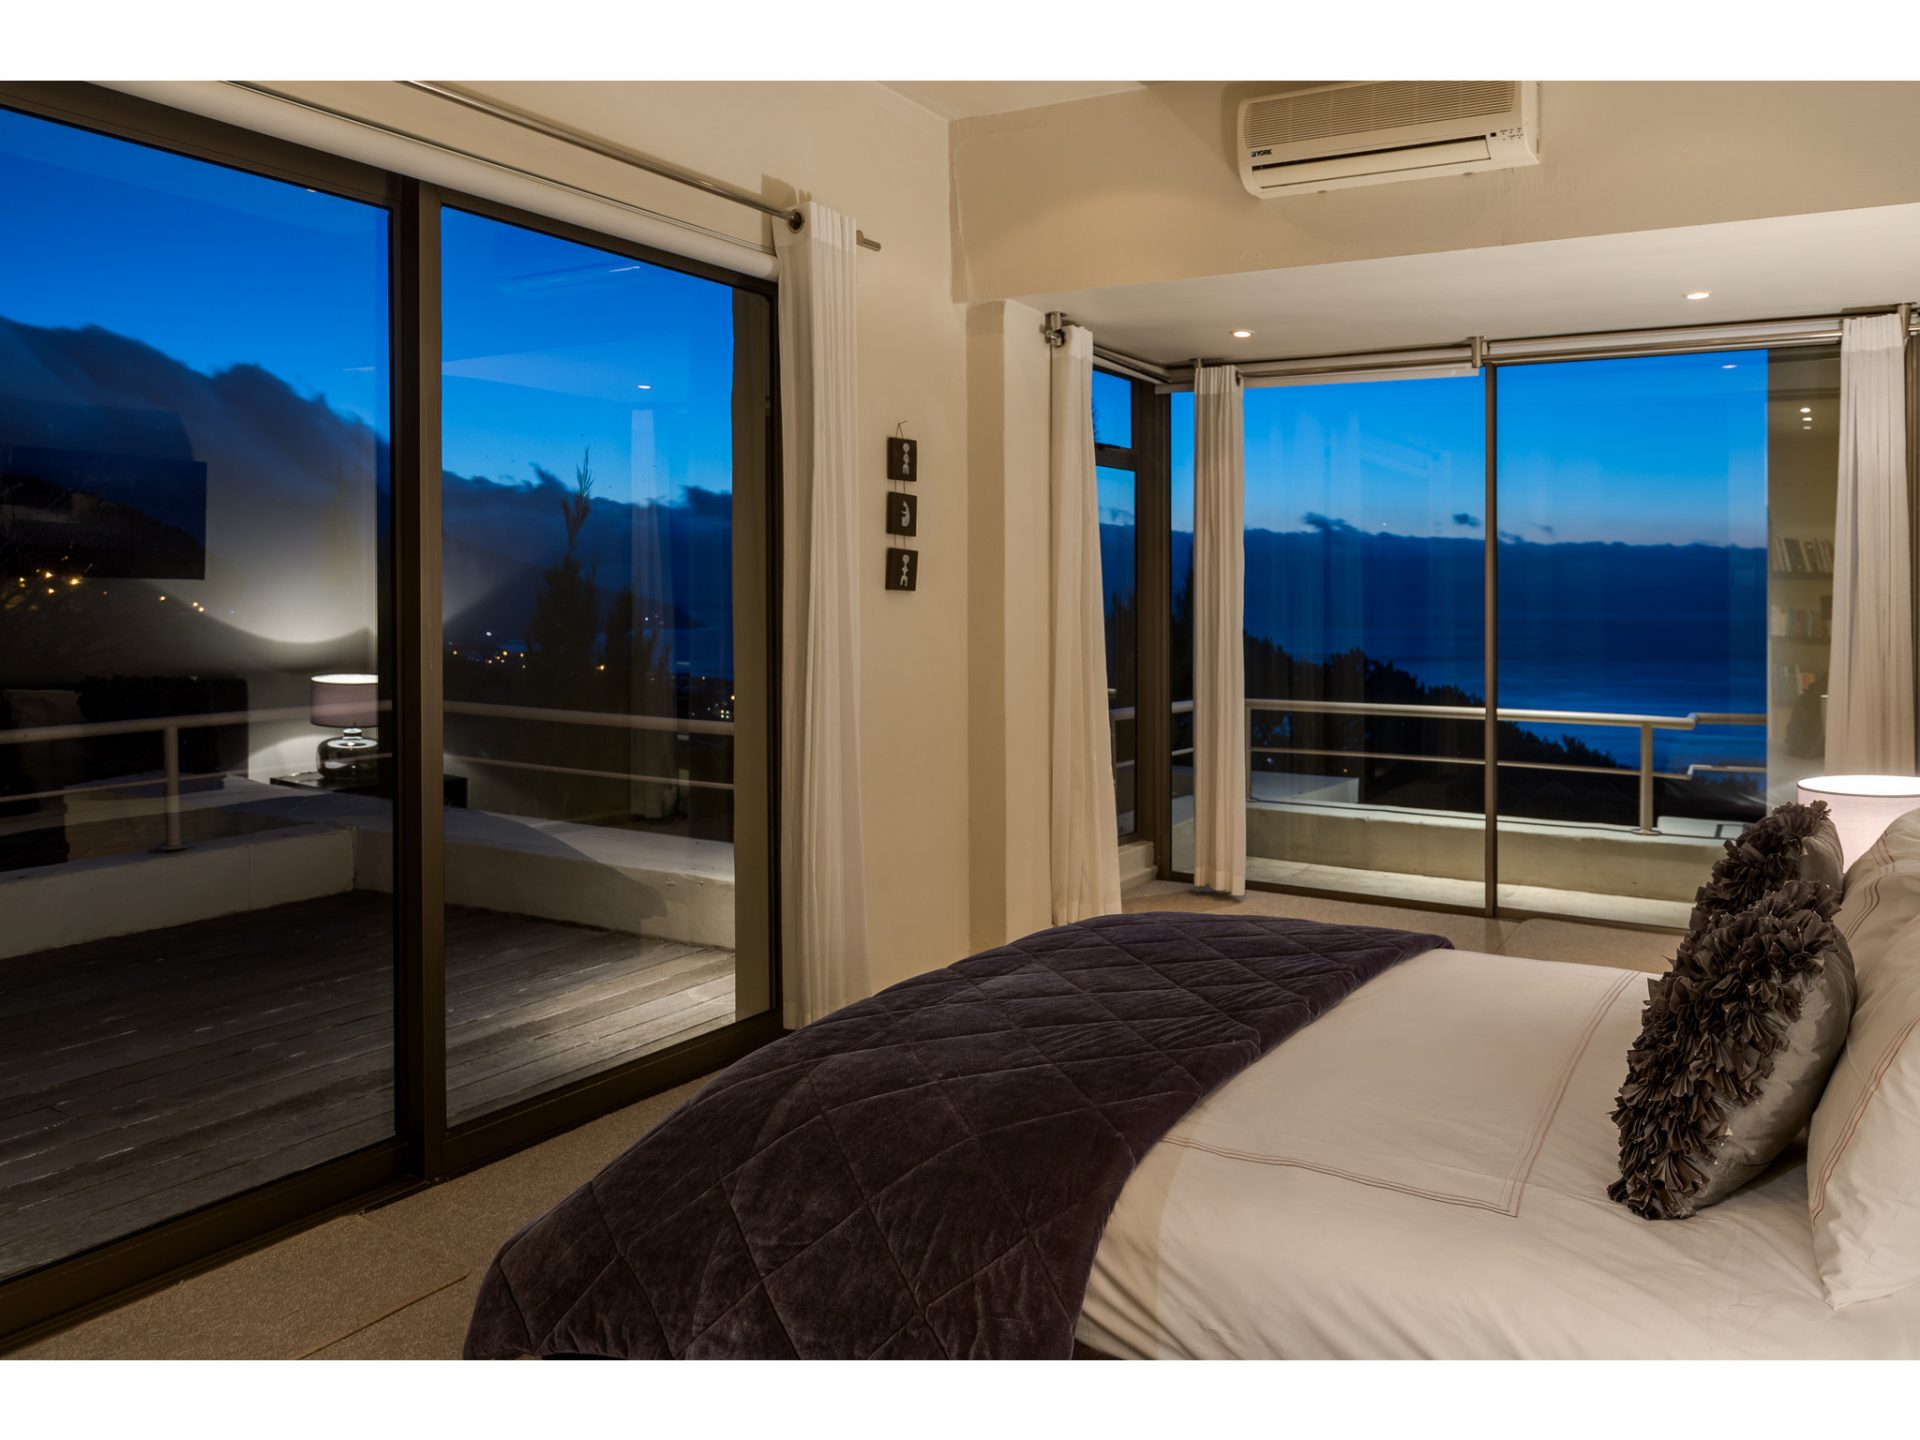 Photo 8 of Geneva Sunsets accommodation in Camps Bay, Cape Town with 6 bedrooms and 7 bathrooms